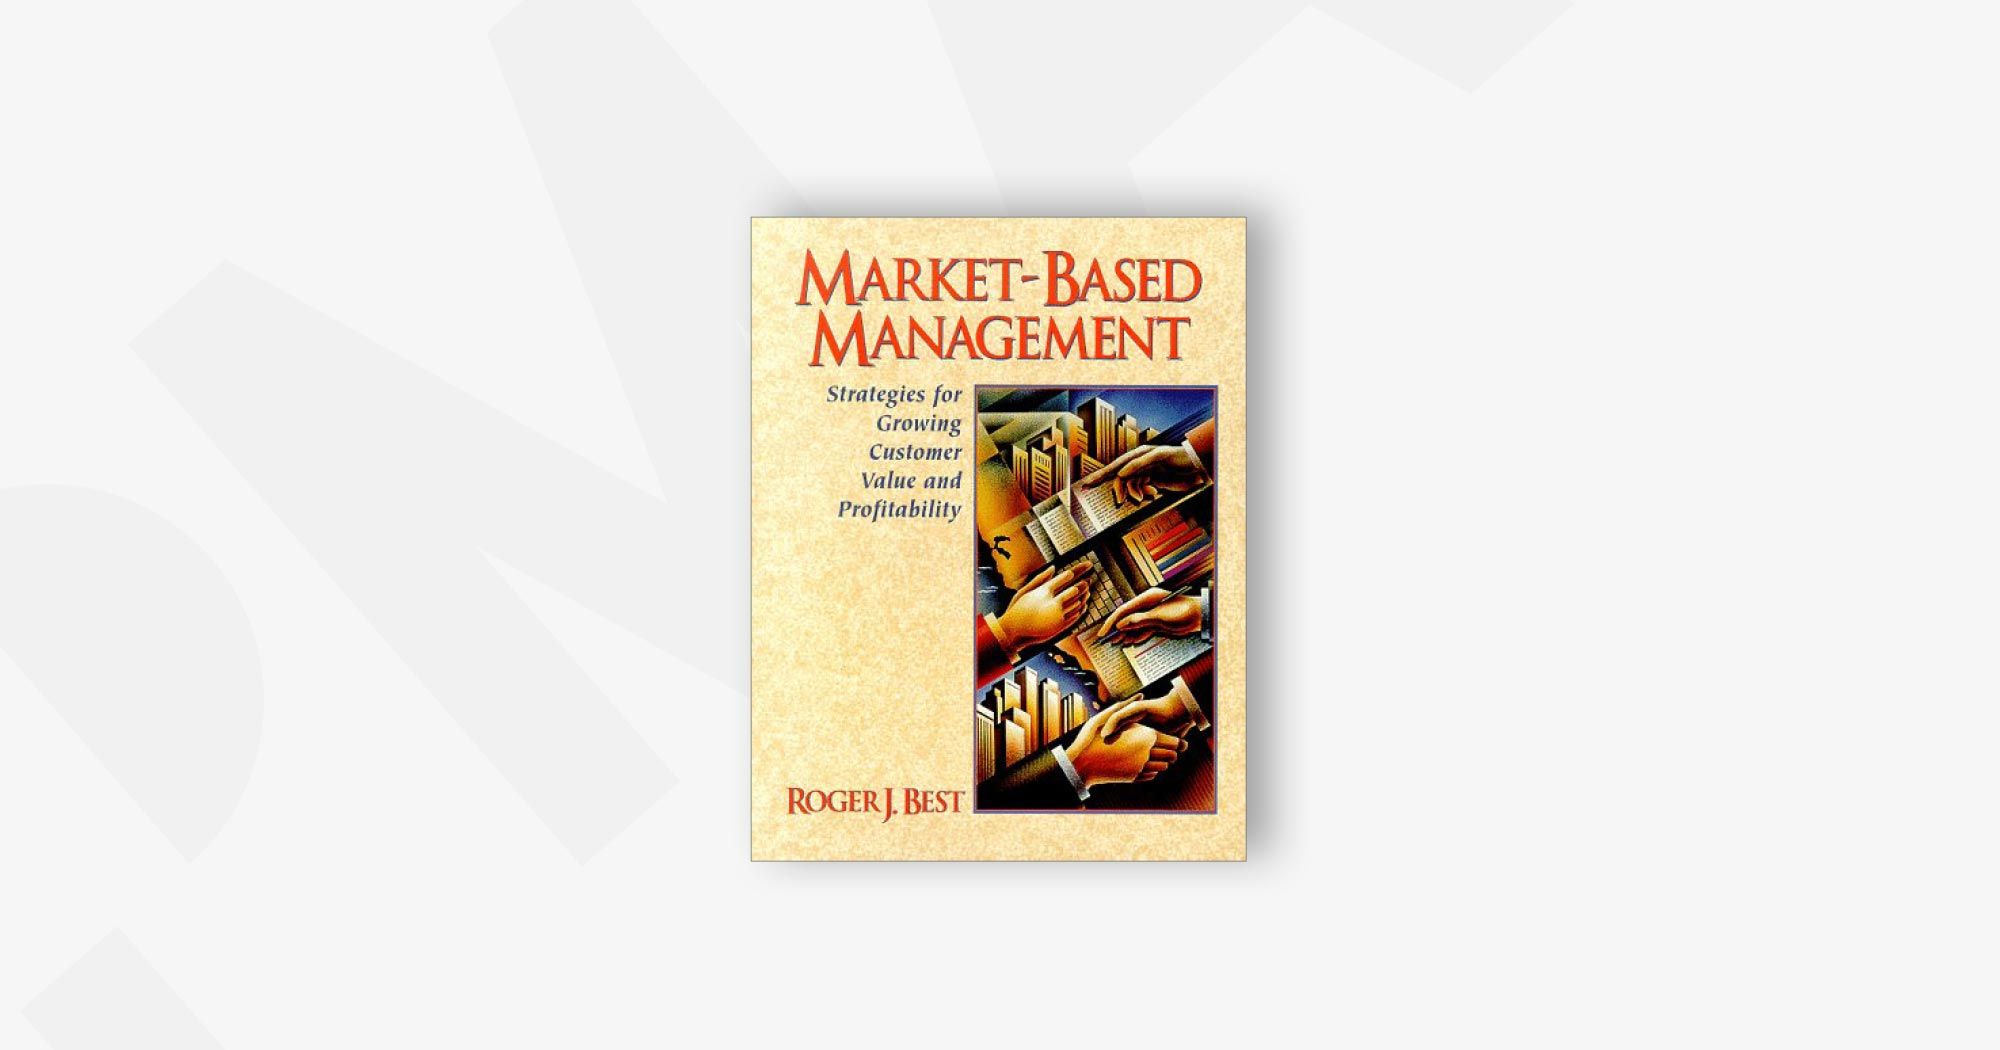 Market-Based Management: Strategies for Growing Customer Value and Profitability – Roger Best